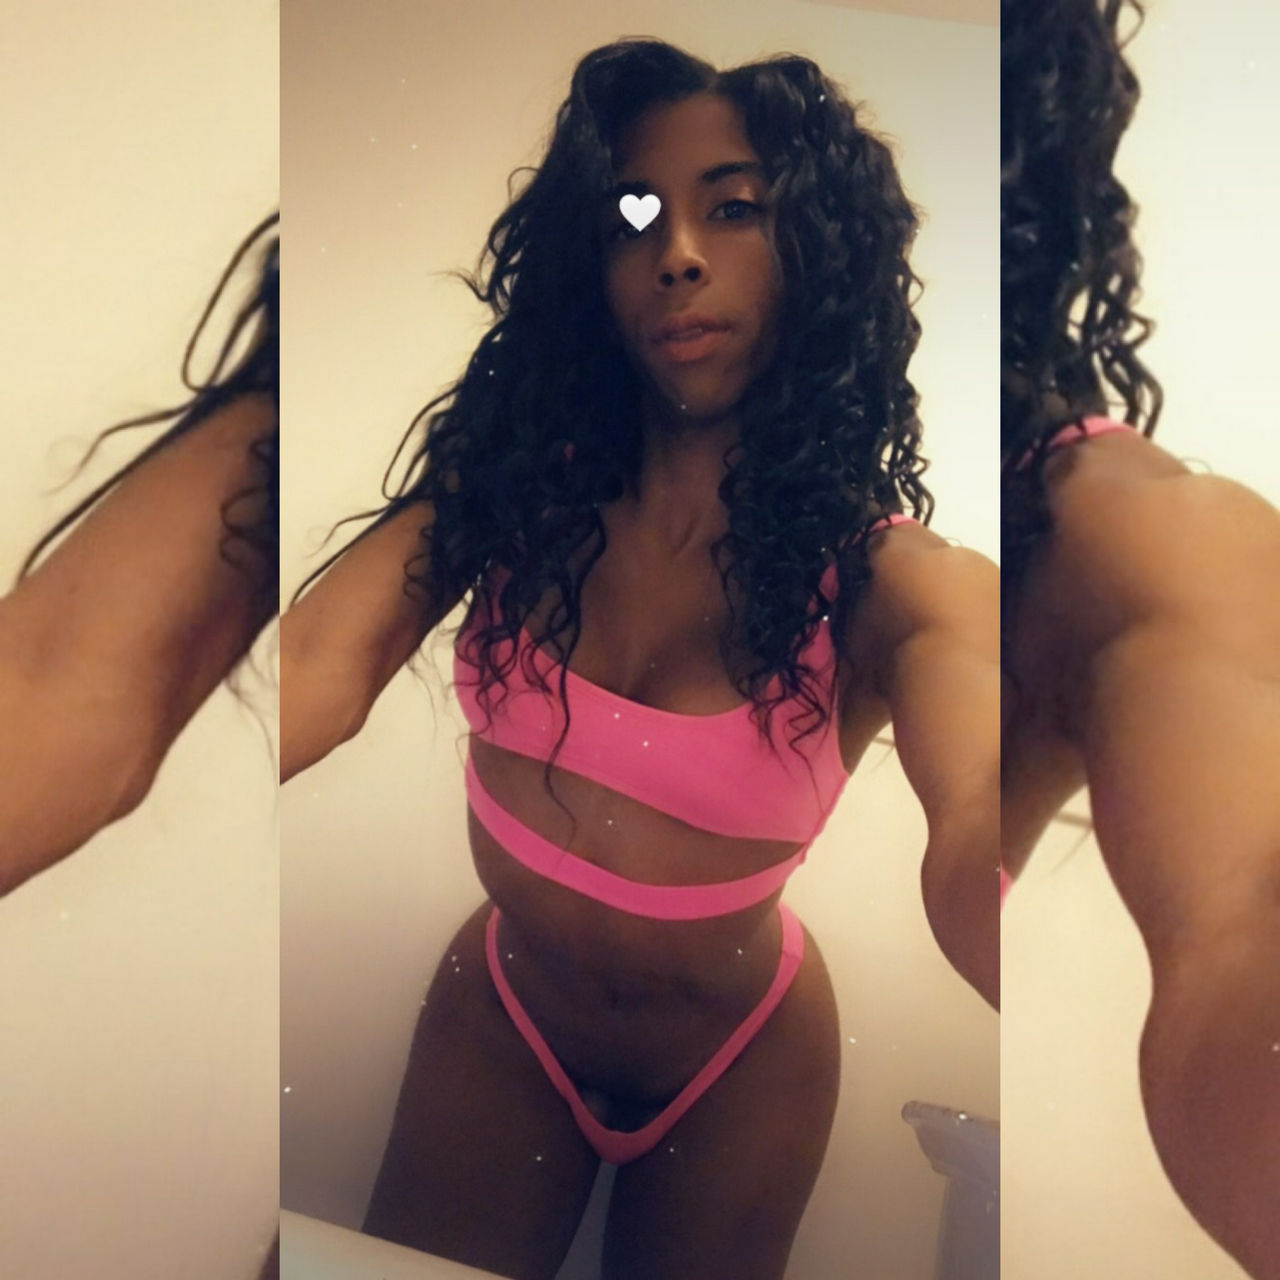 Escorts Jersey City, New Jersey 💦Onlyfans&FtShow